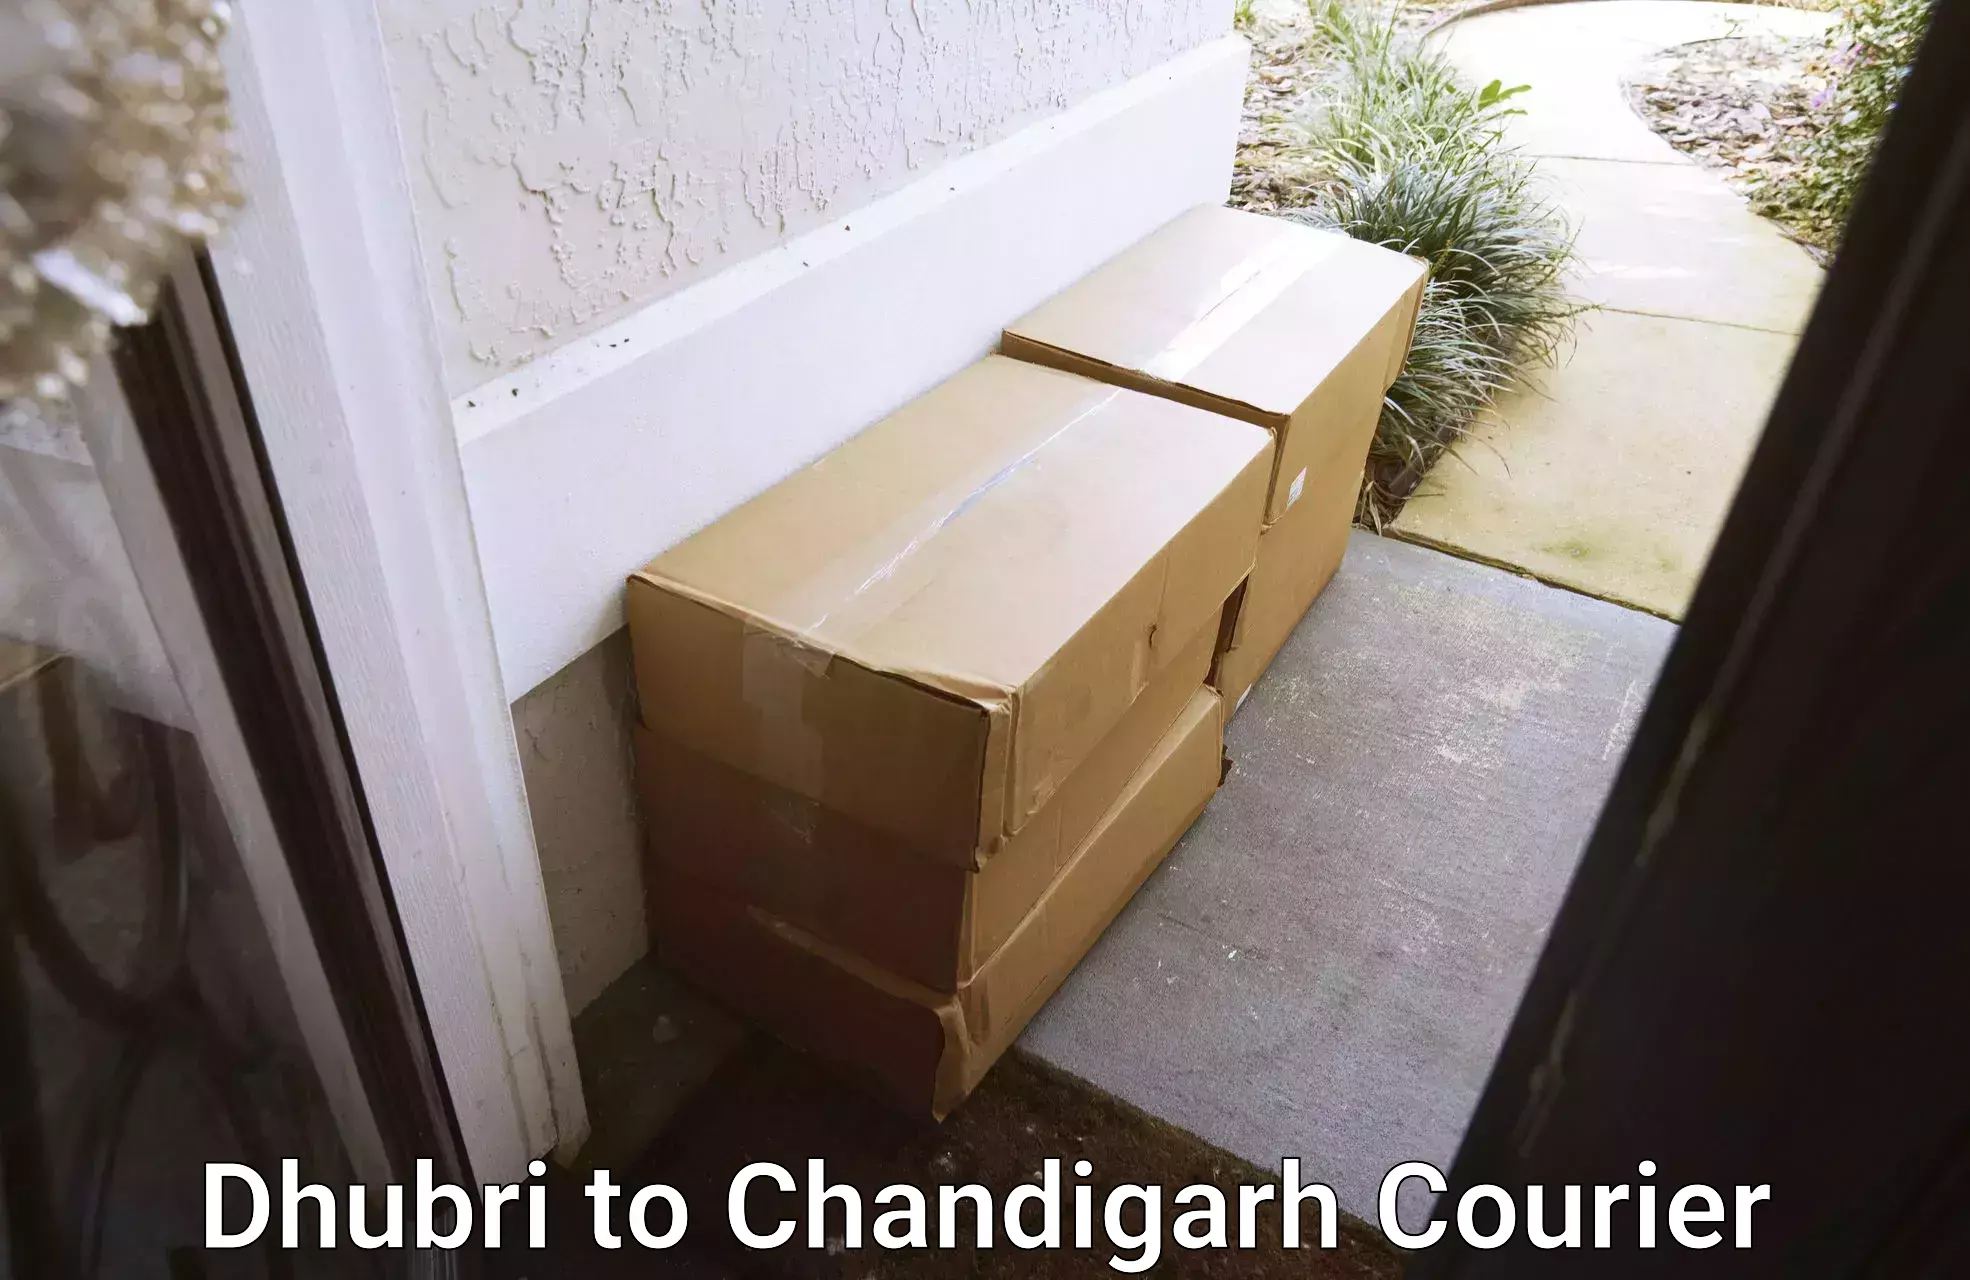 On-call courier service Dhubri to Chandigarh